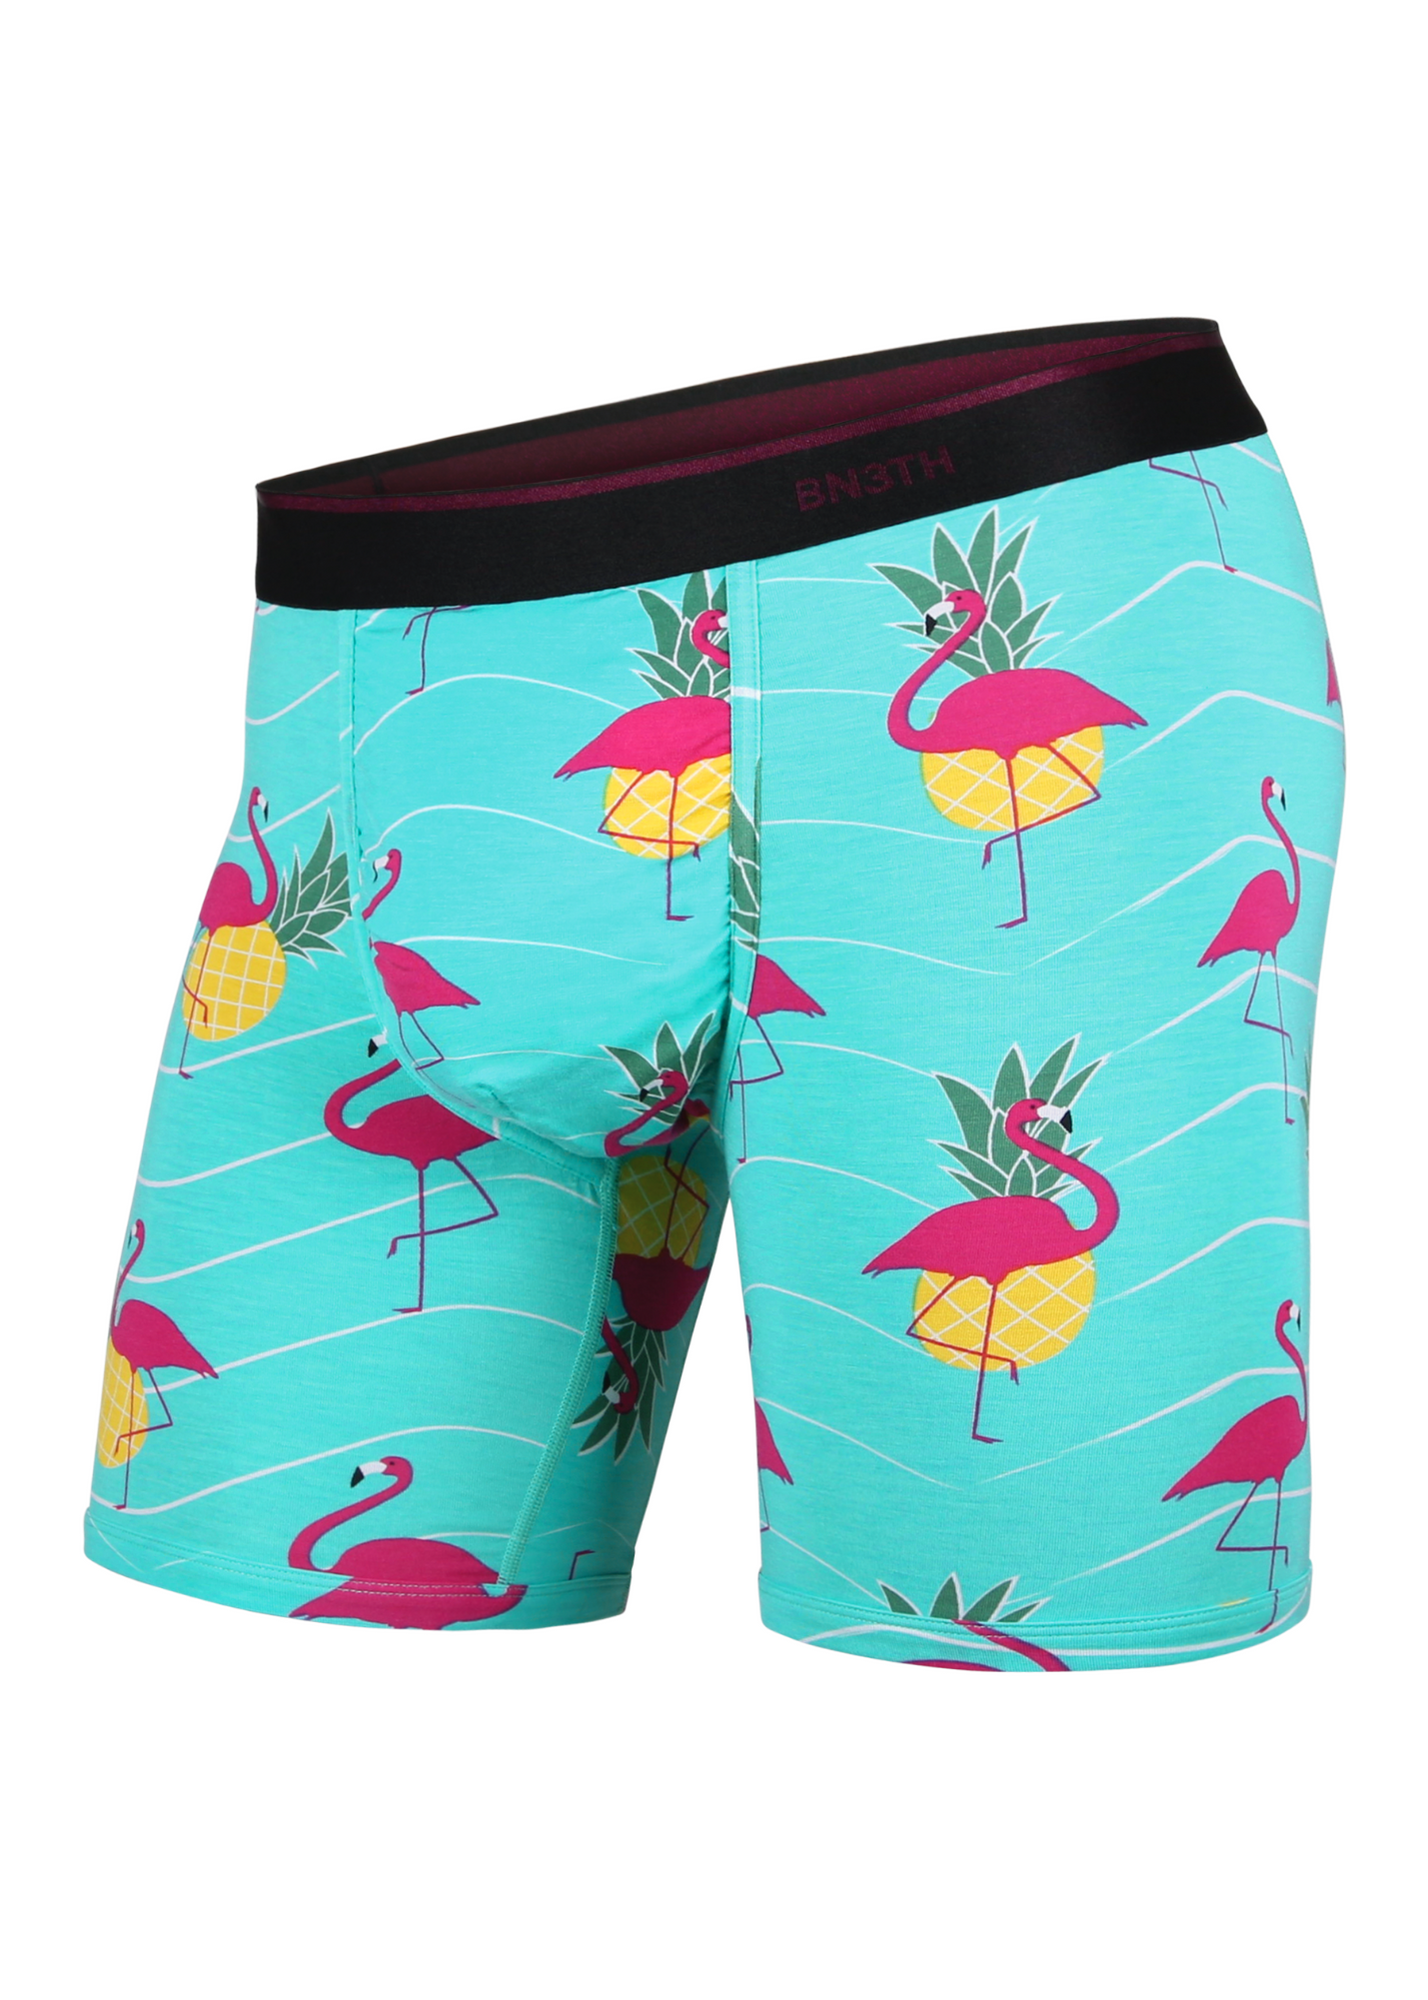 BN3TH Boxer Briefs with Flamingos and Pineapples